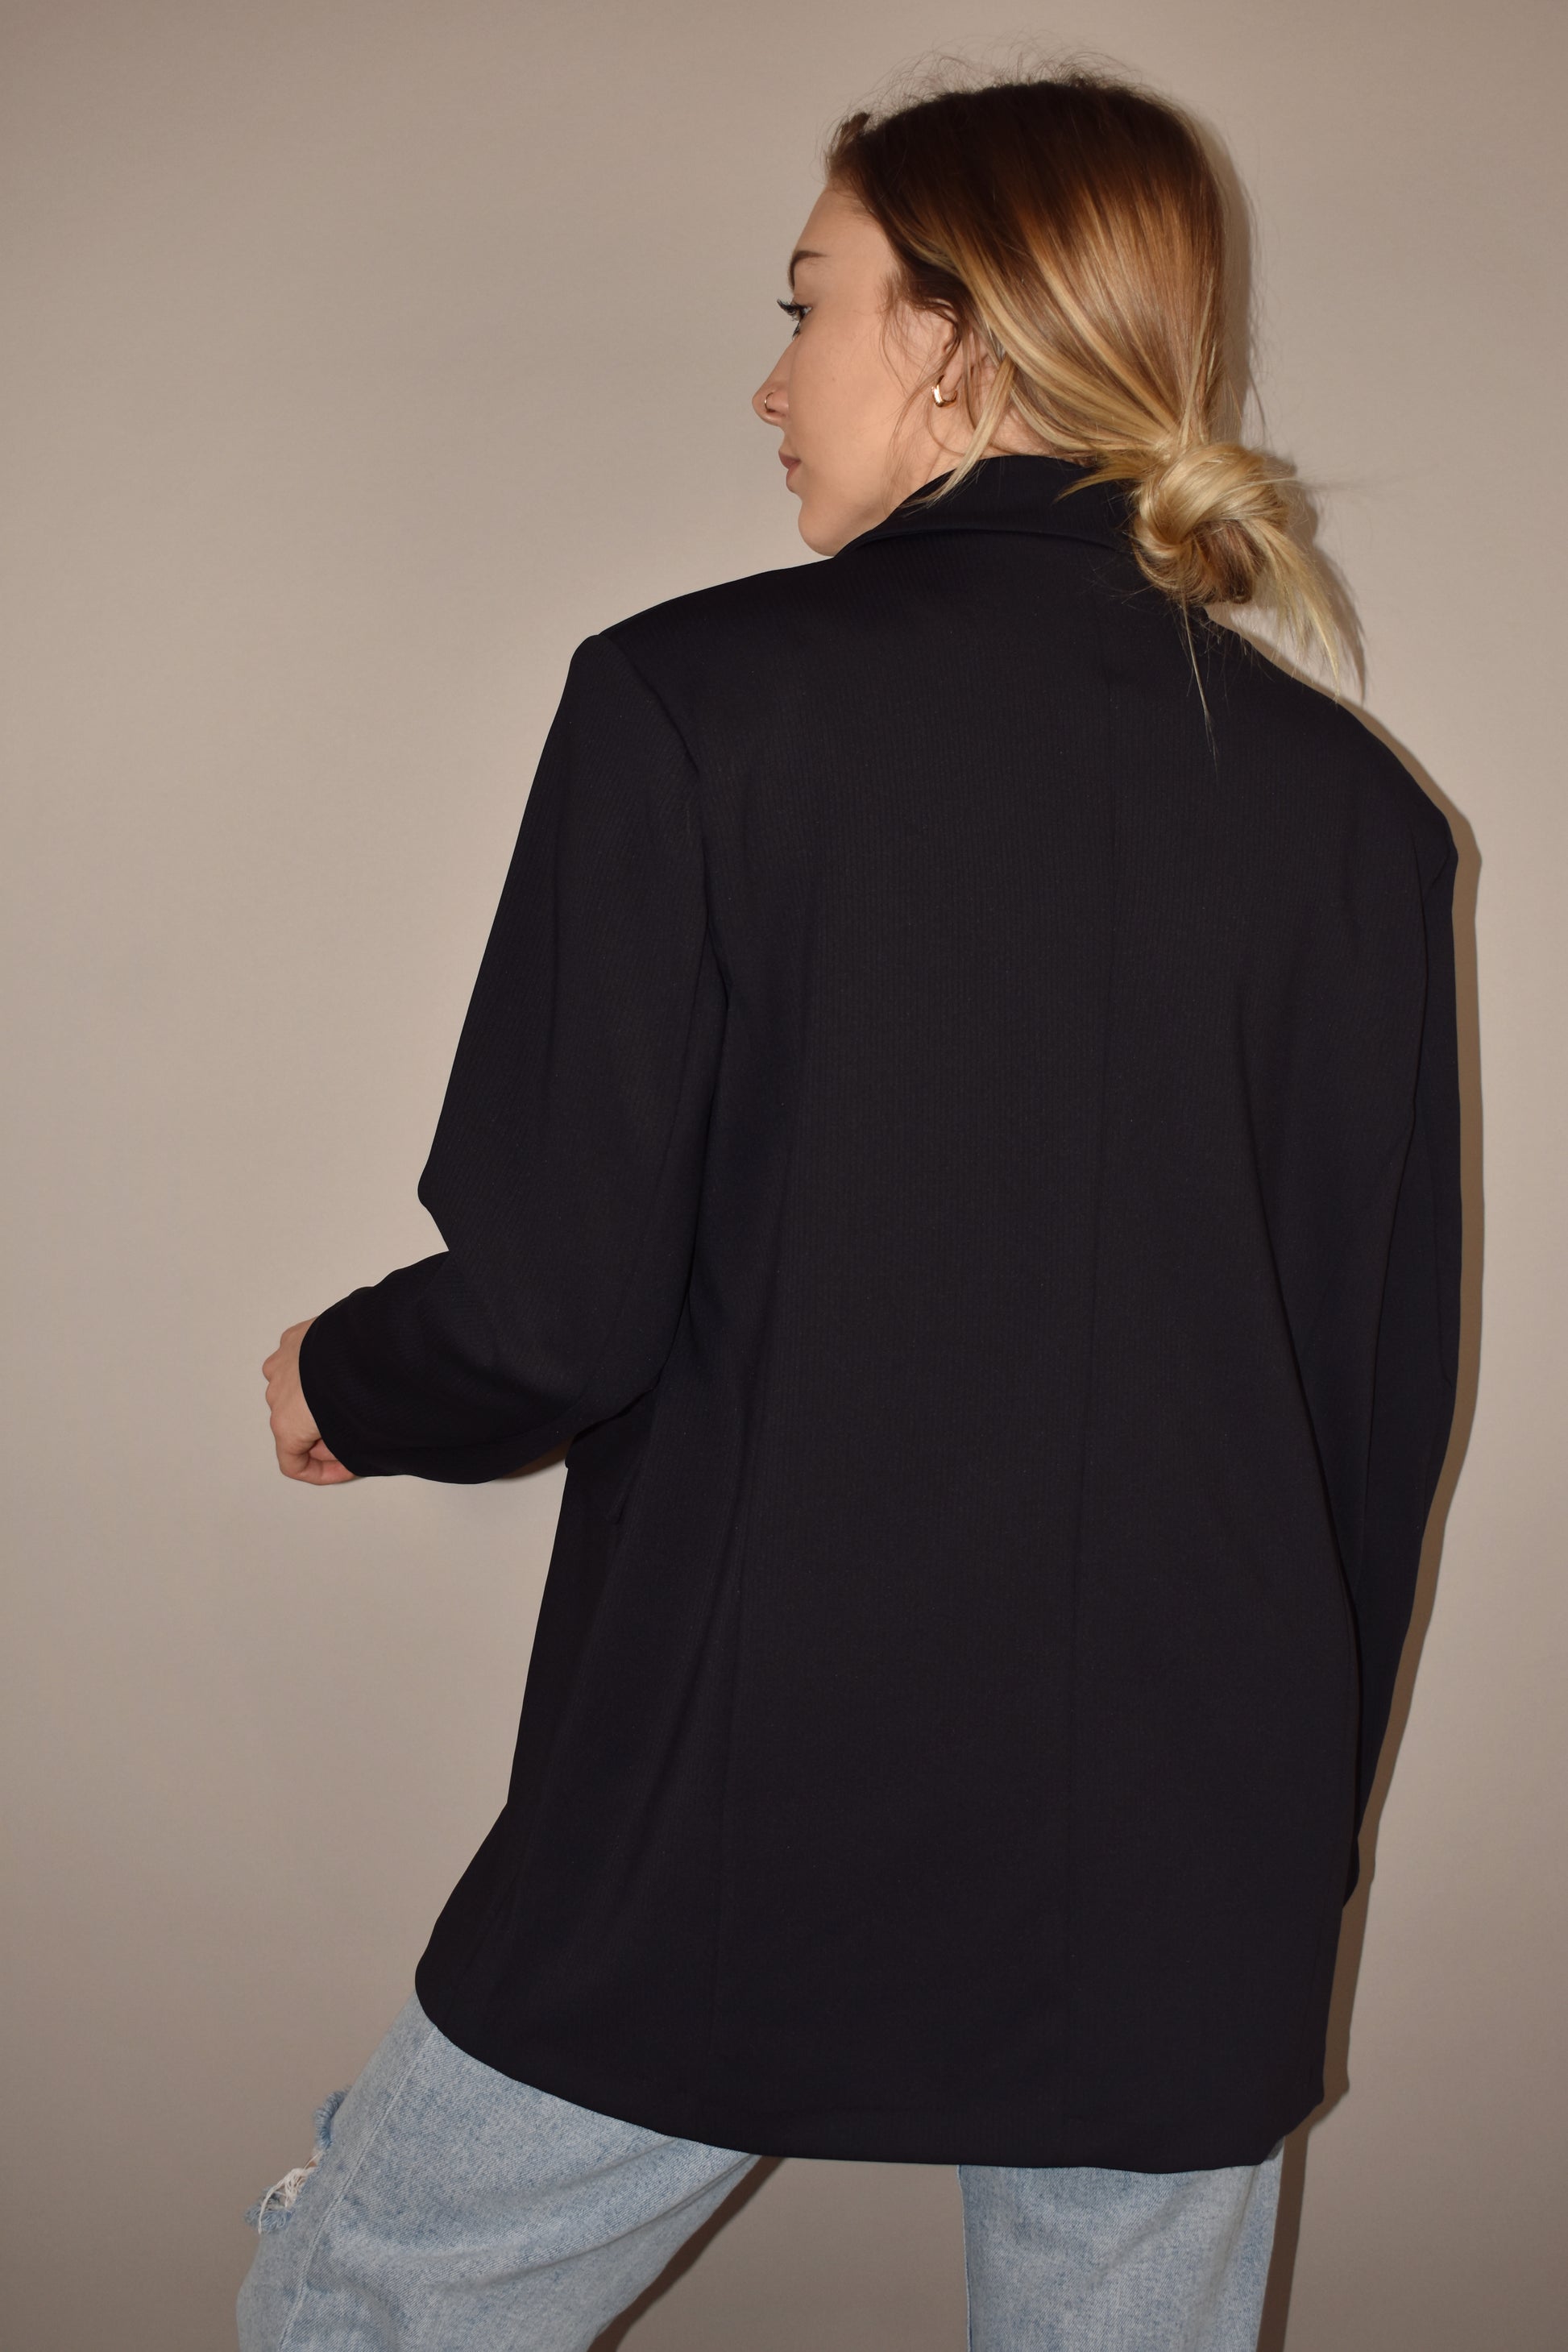 athletic and stretchy oversized blazer with shoulder pads and front flap patch pockets.